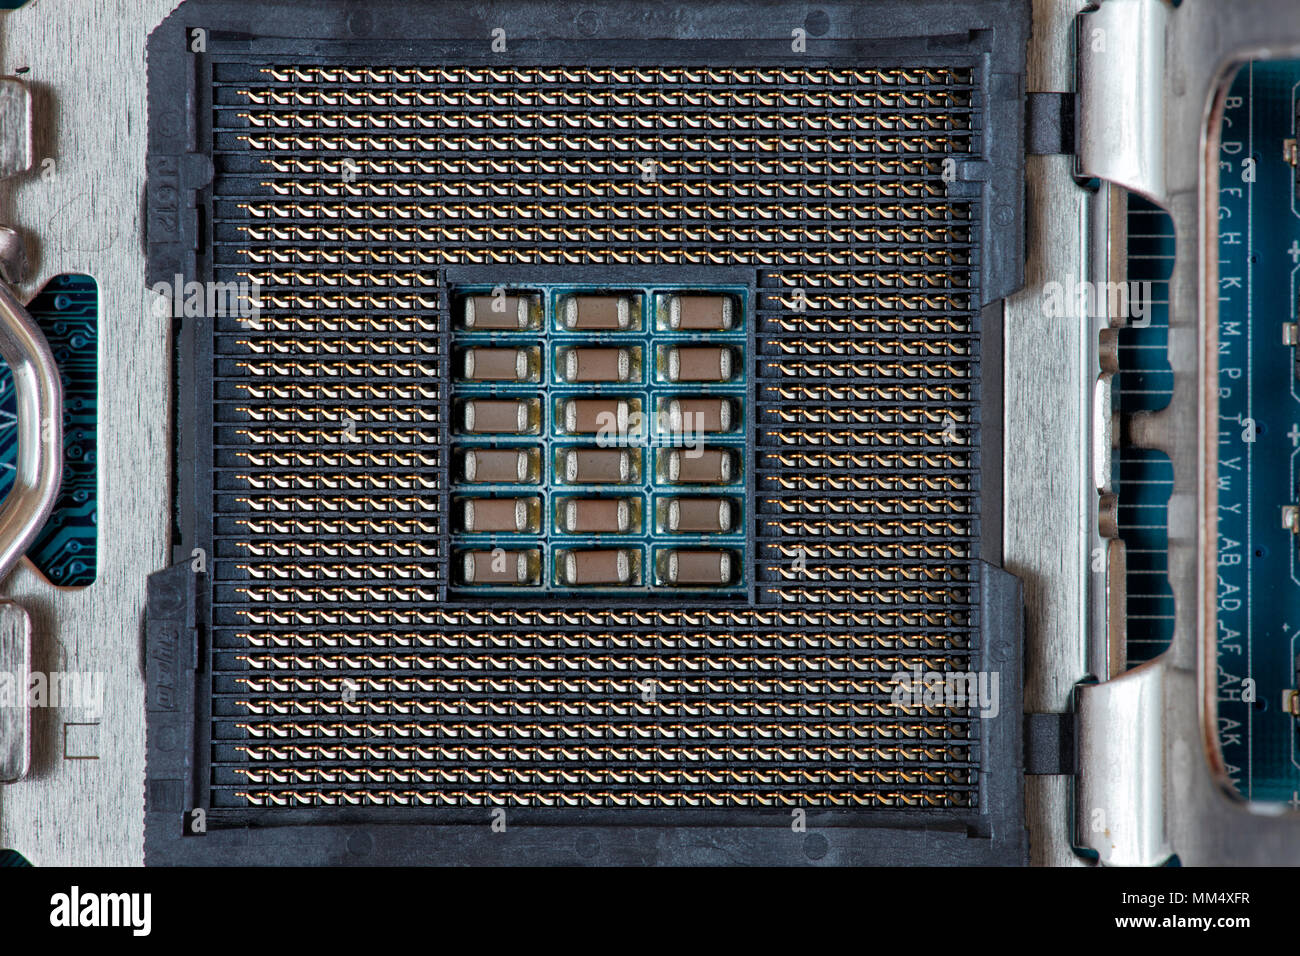 Electrical contacts (pins) in Intel LGA1150 processor socket with retention clip open. Stock Photo